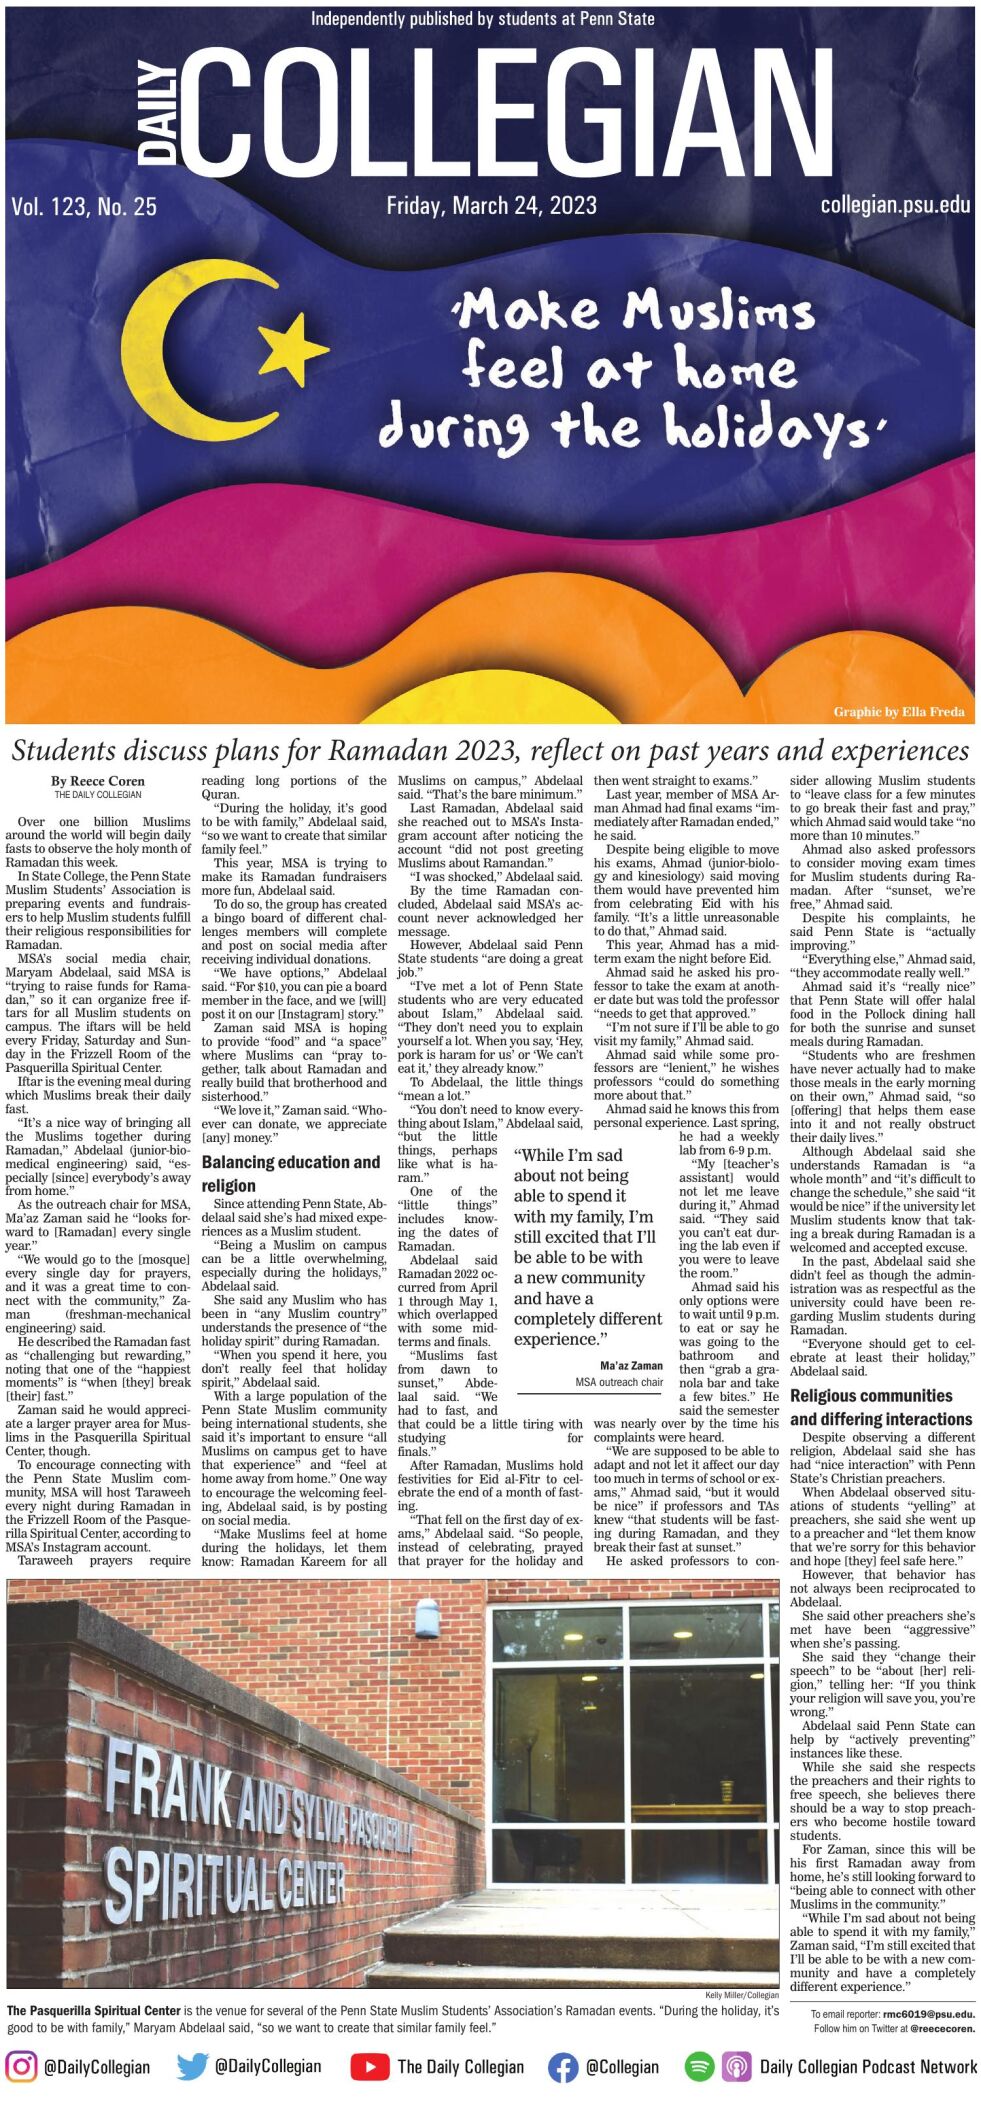 The Daily Collegian for March 24, 2023